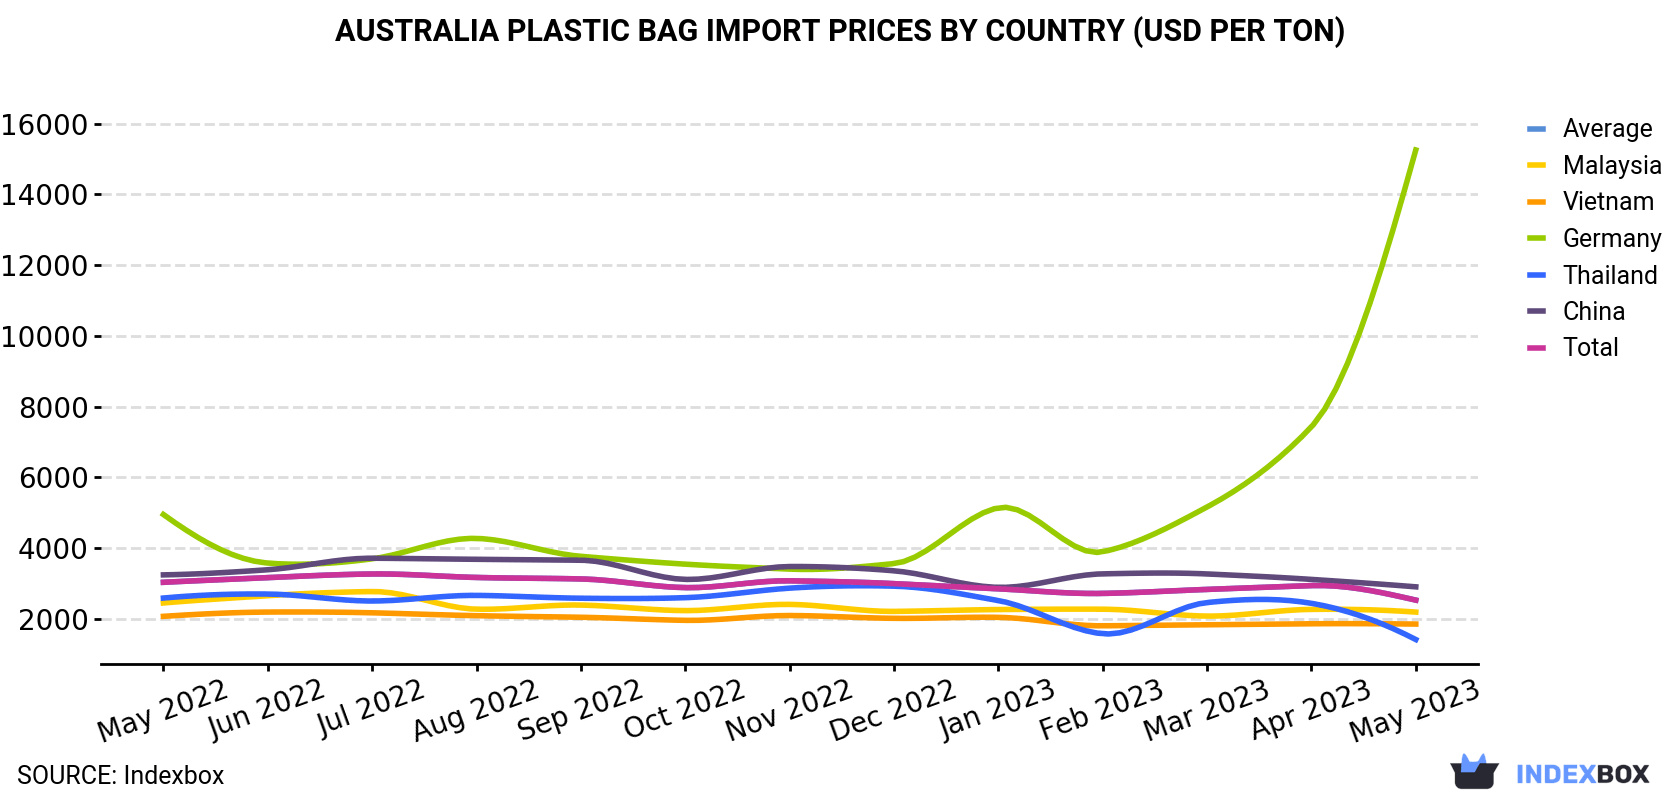 Australia Plastic Bag Import Prices By Country (USD Per Ton)